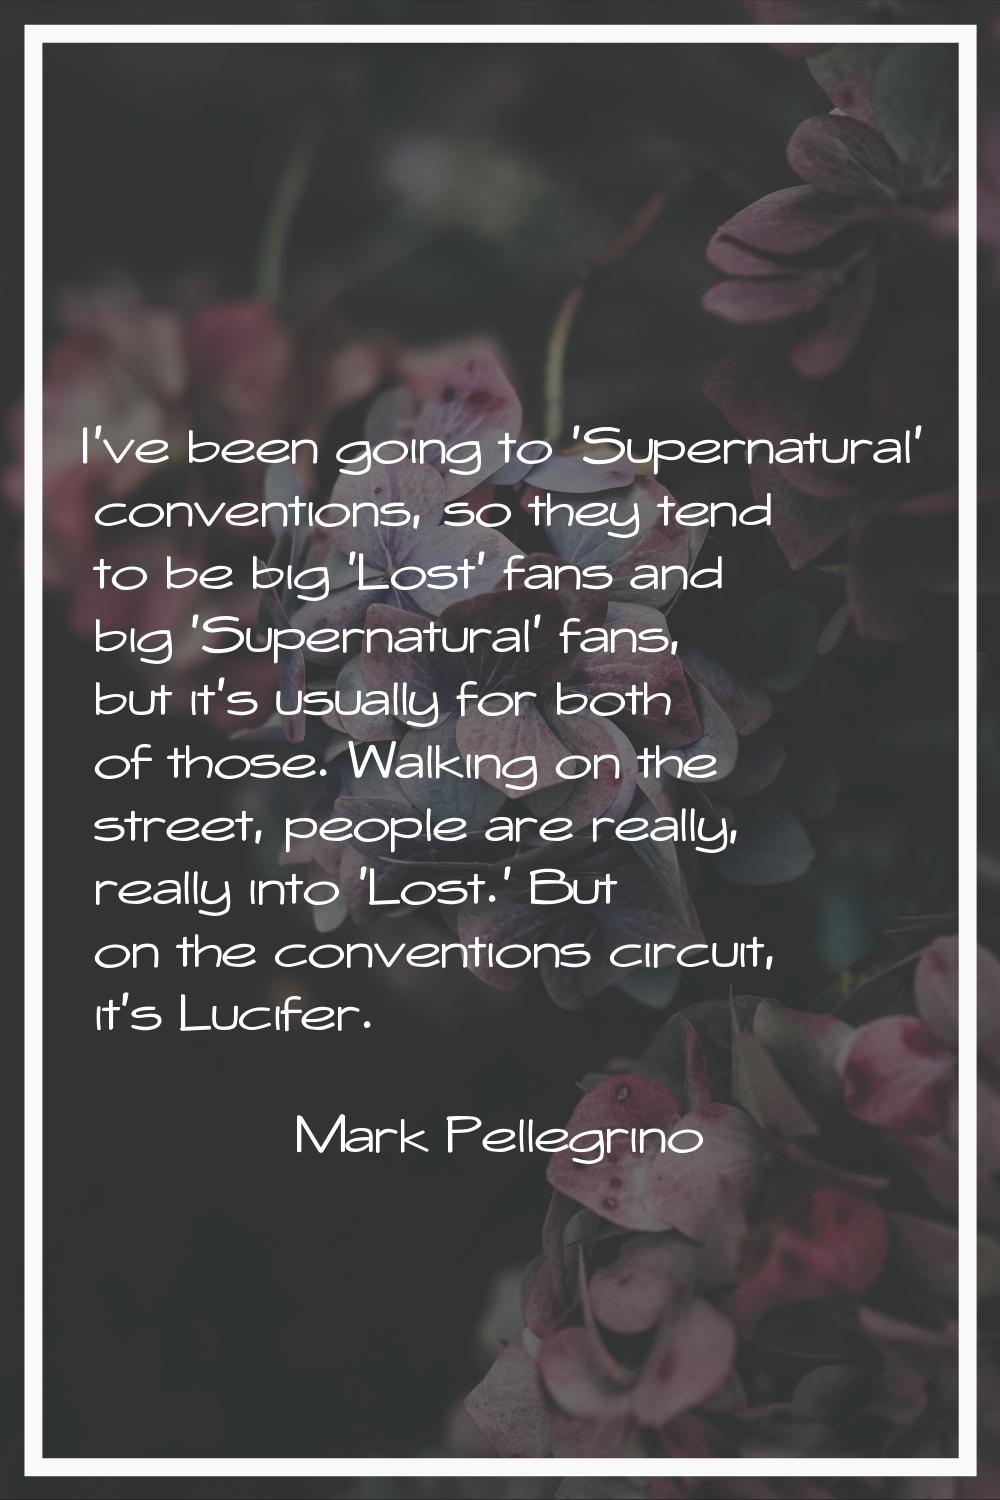 I've been going to 'Supernatural' conventions, so they tend to be big 'Lost' fans and big 'Supernat